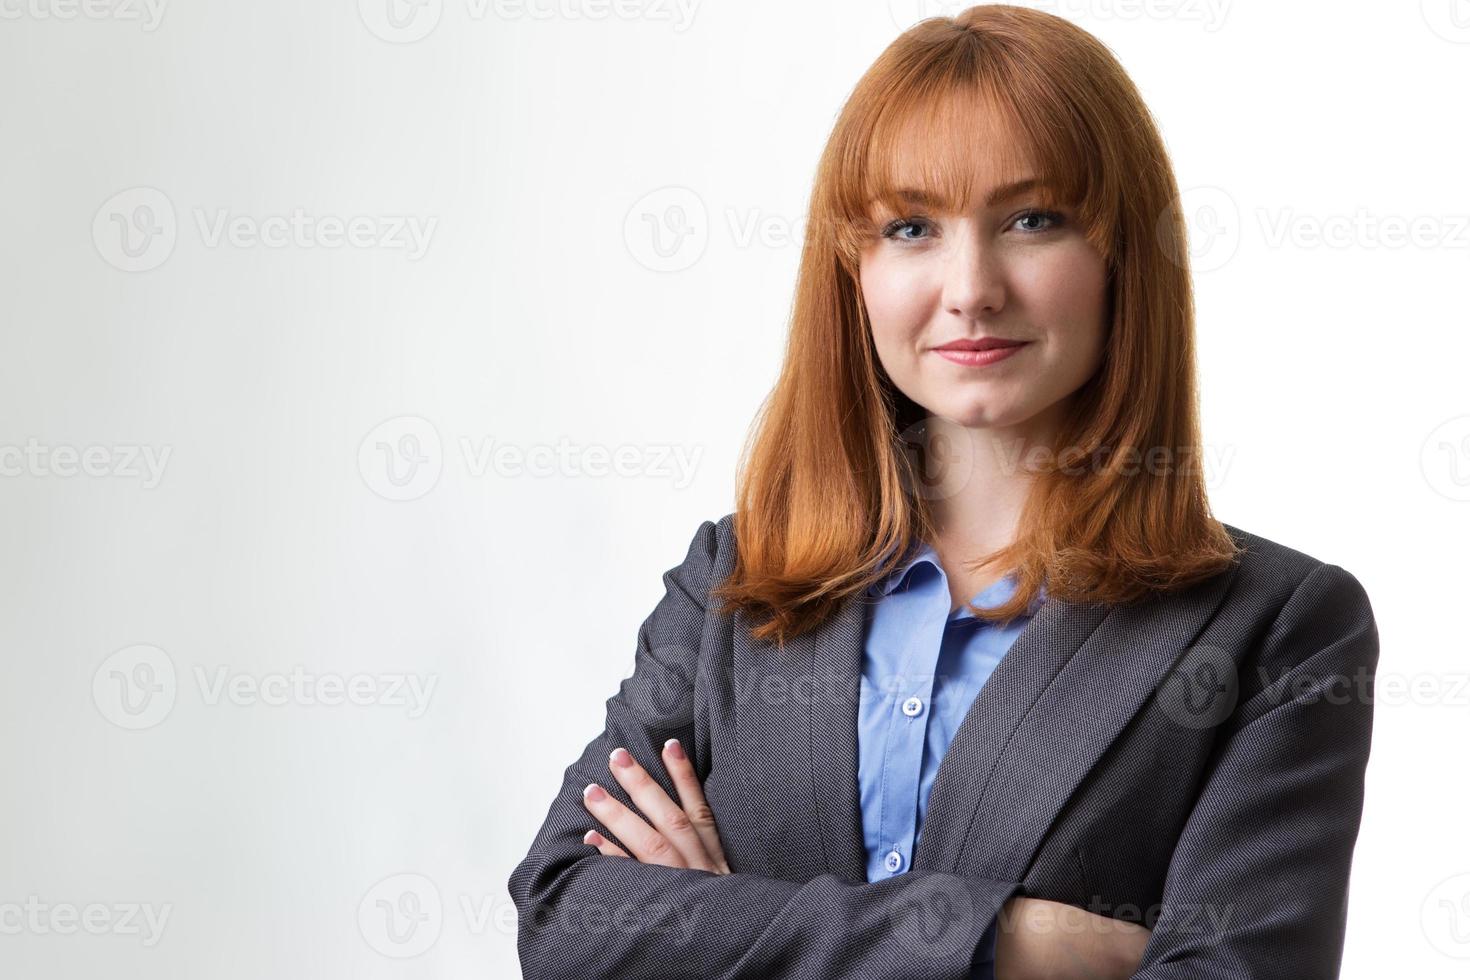 woman in business photo